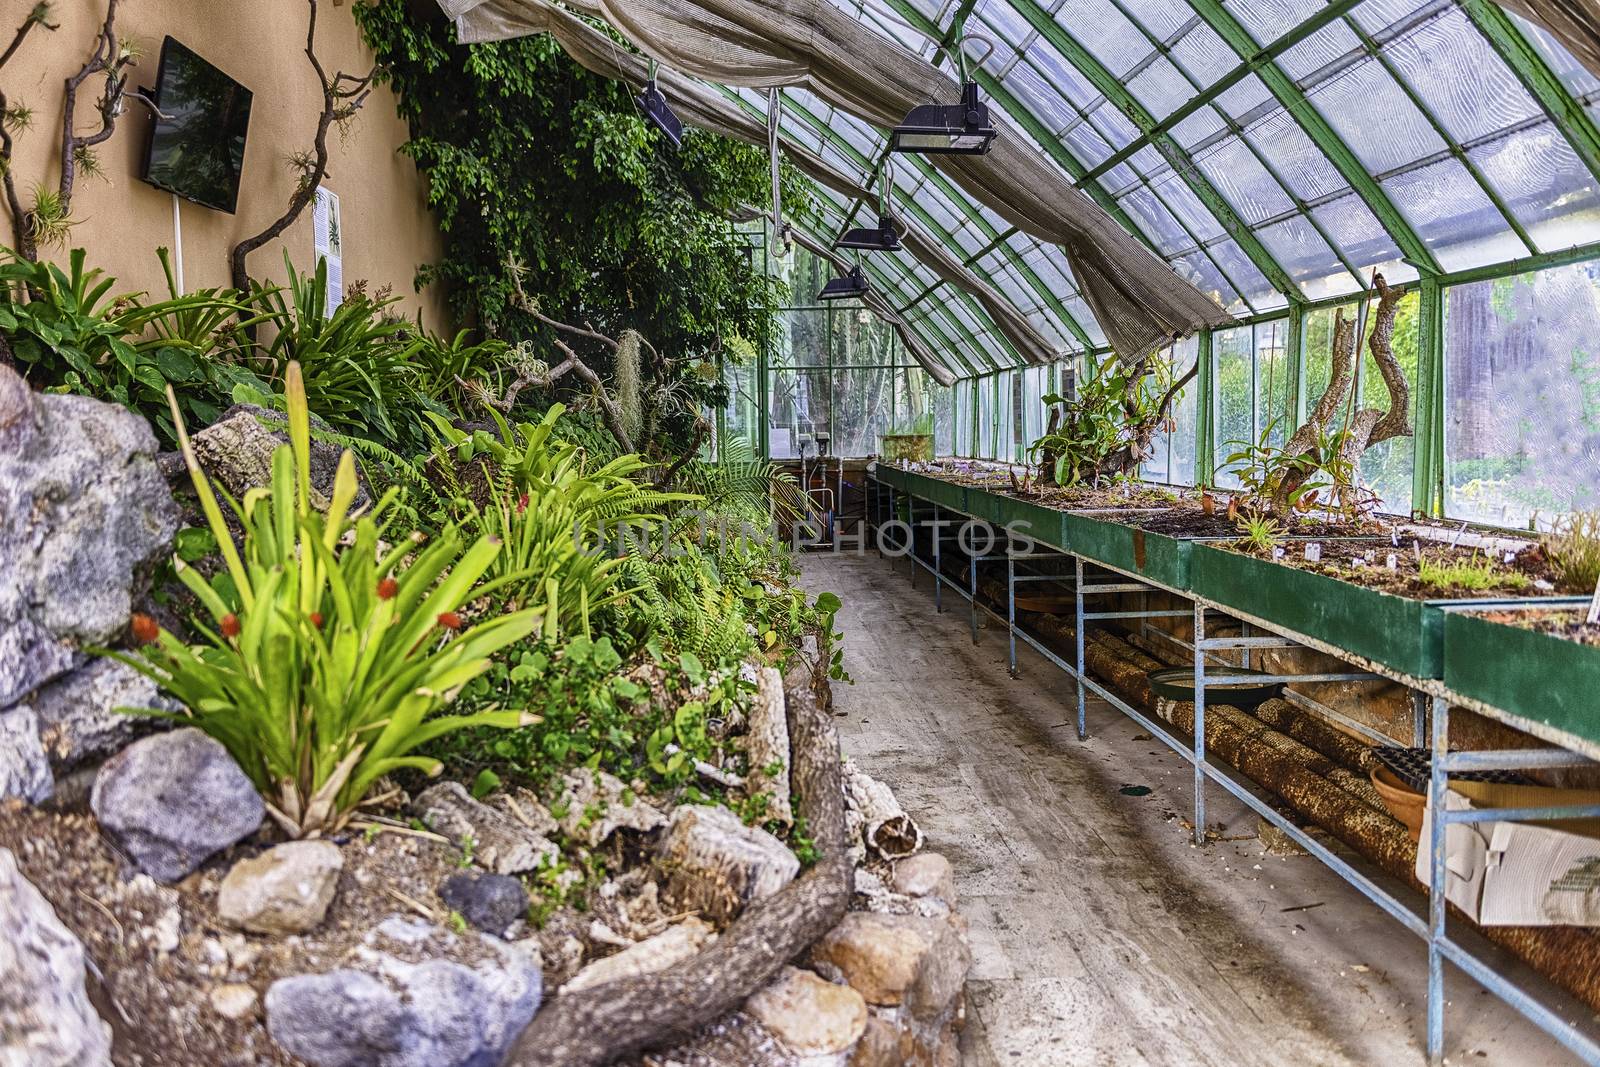 Inside a greenhouse with cultivated plants by marcorubino